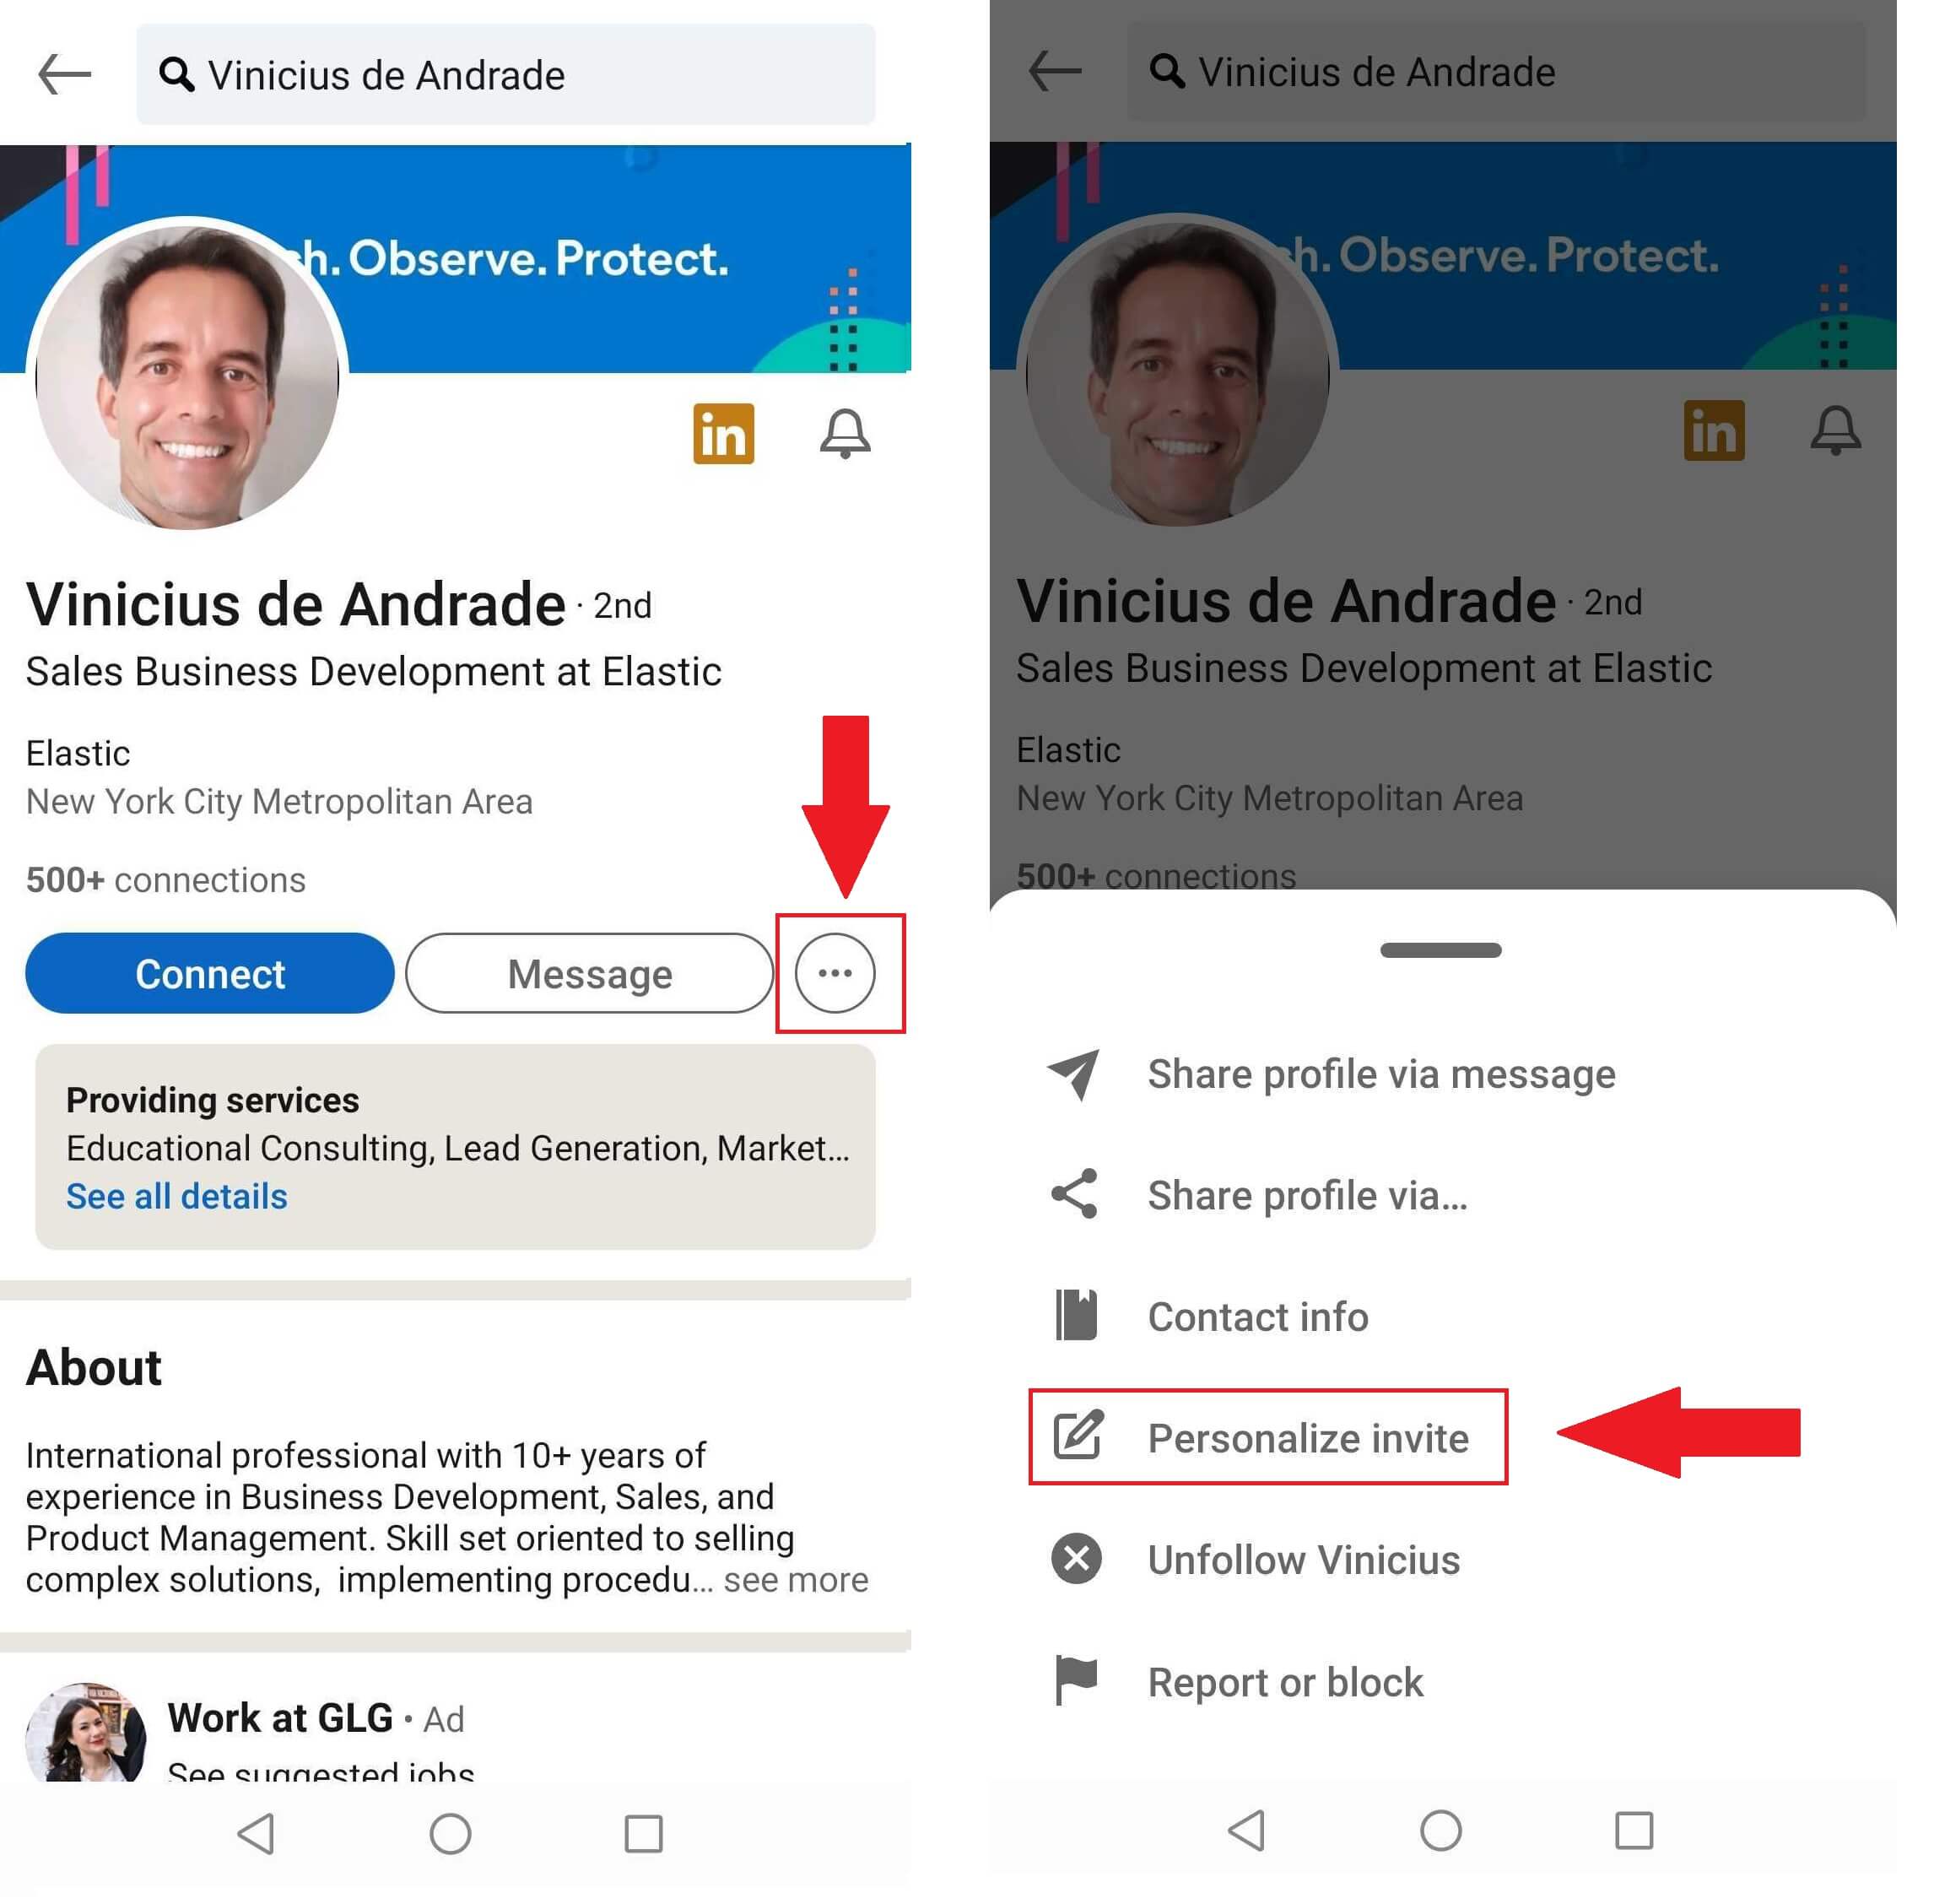 Image showing how to connect with someone on LinkedIn via their profile using LinkedIn app